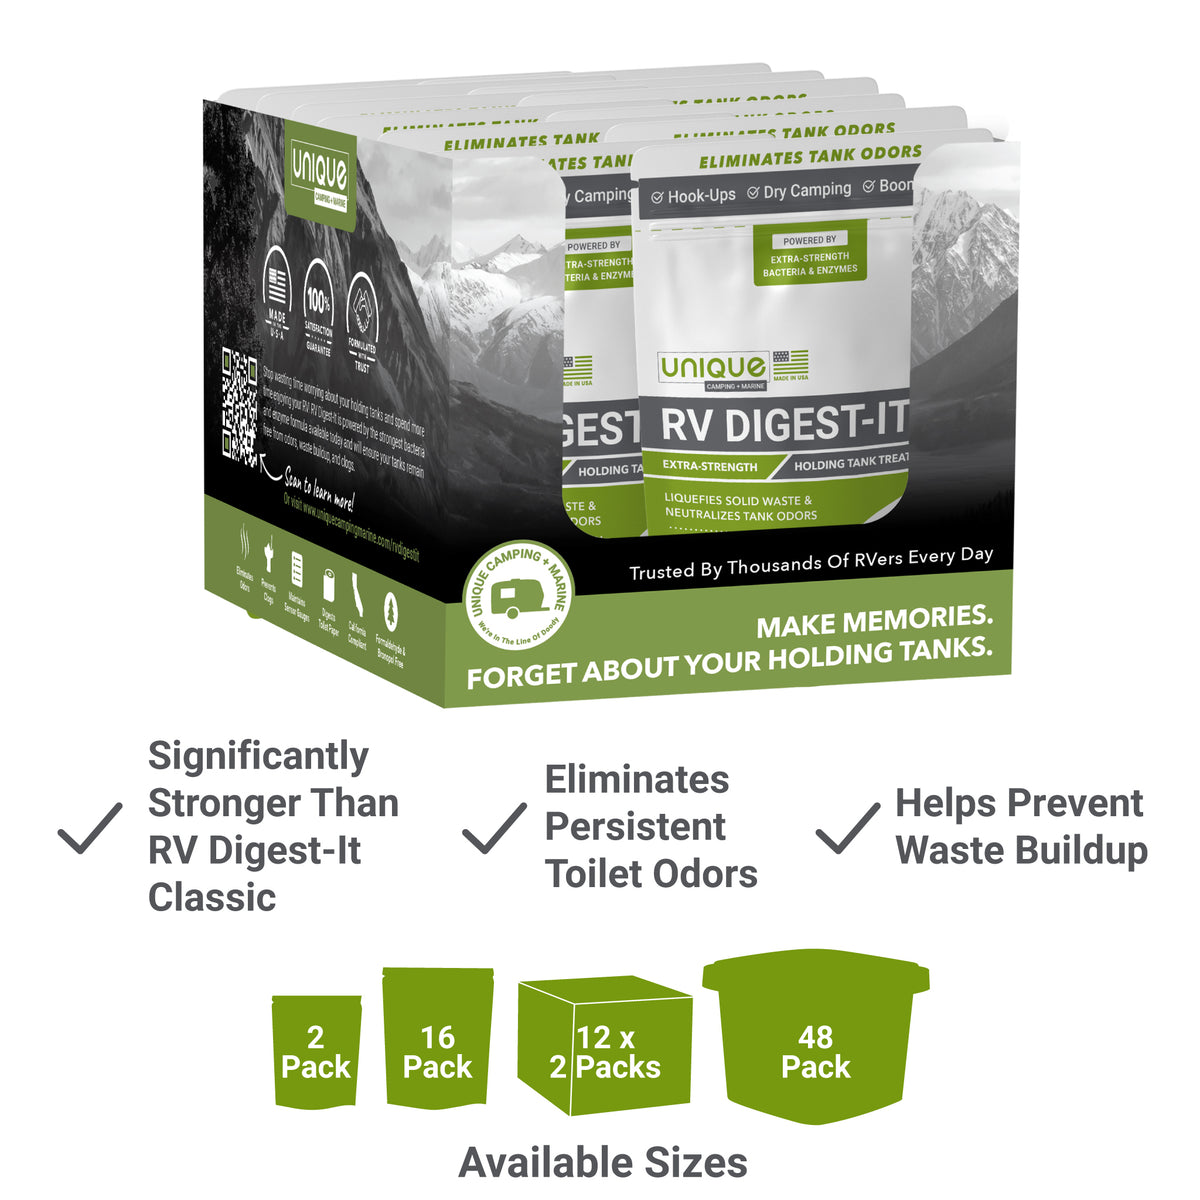 RV Digest-It Plus Drop-In Pods 24 Treatment Case of 12 2-packs